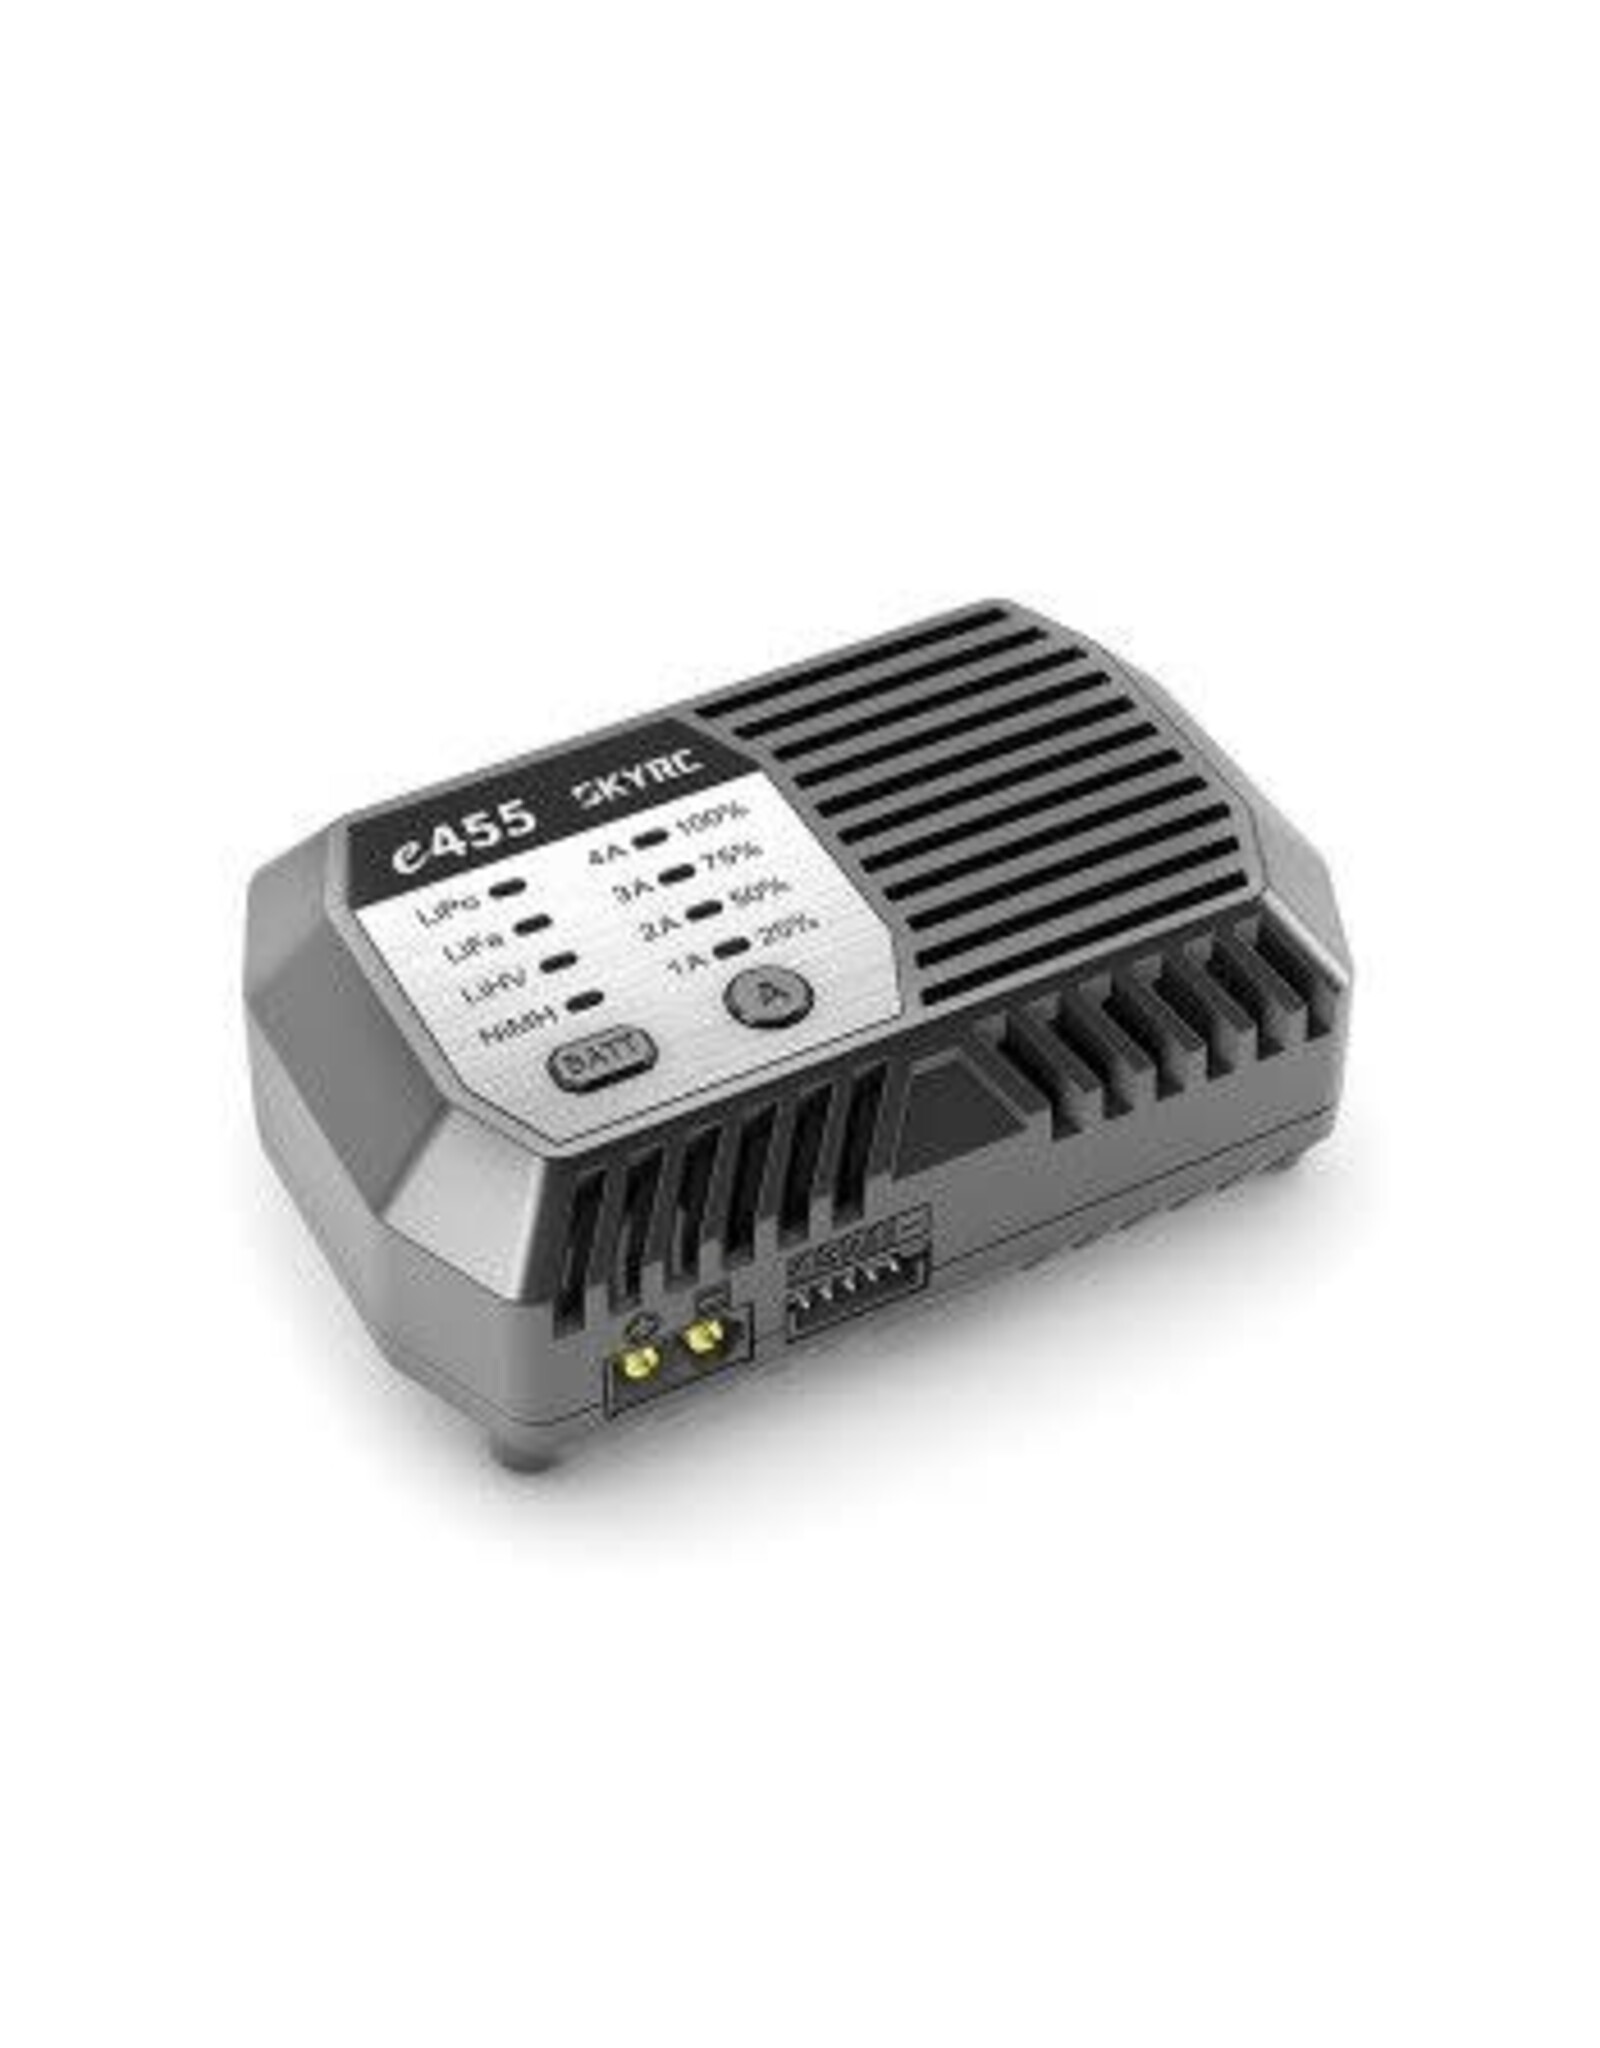 SkyRC SkyRC e455 Battery Charger, AC Only, 4A, 50W, XT60